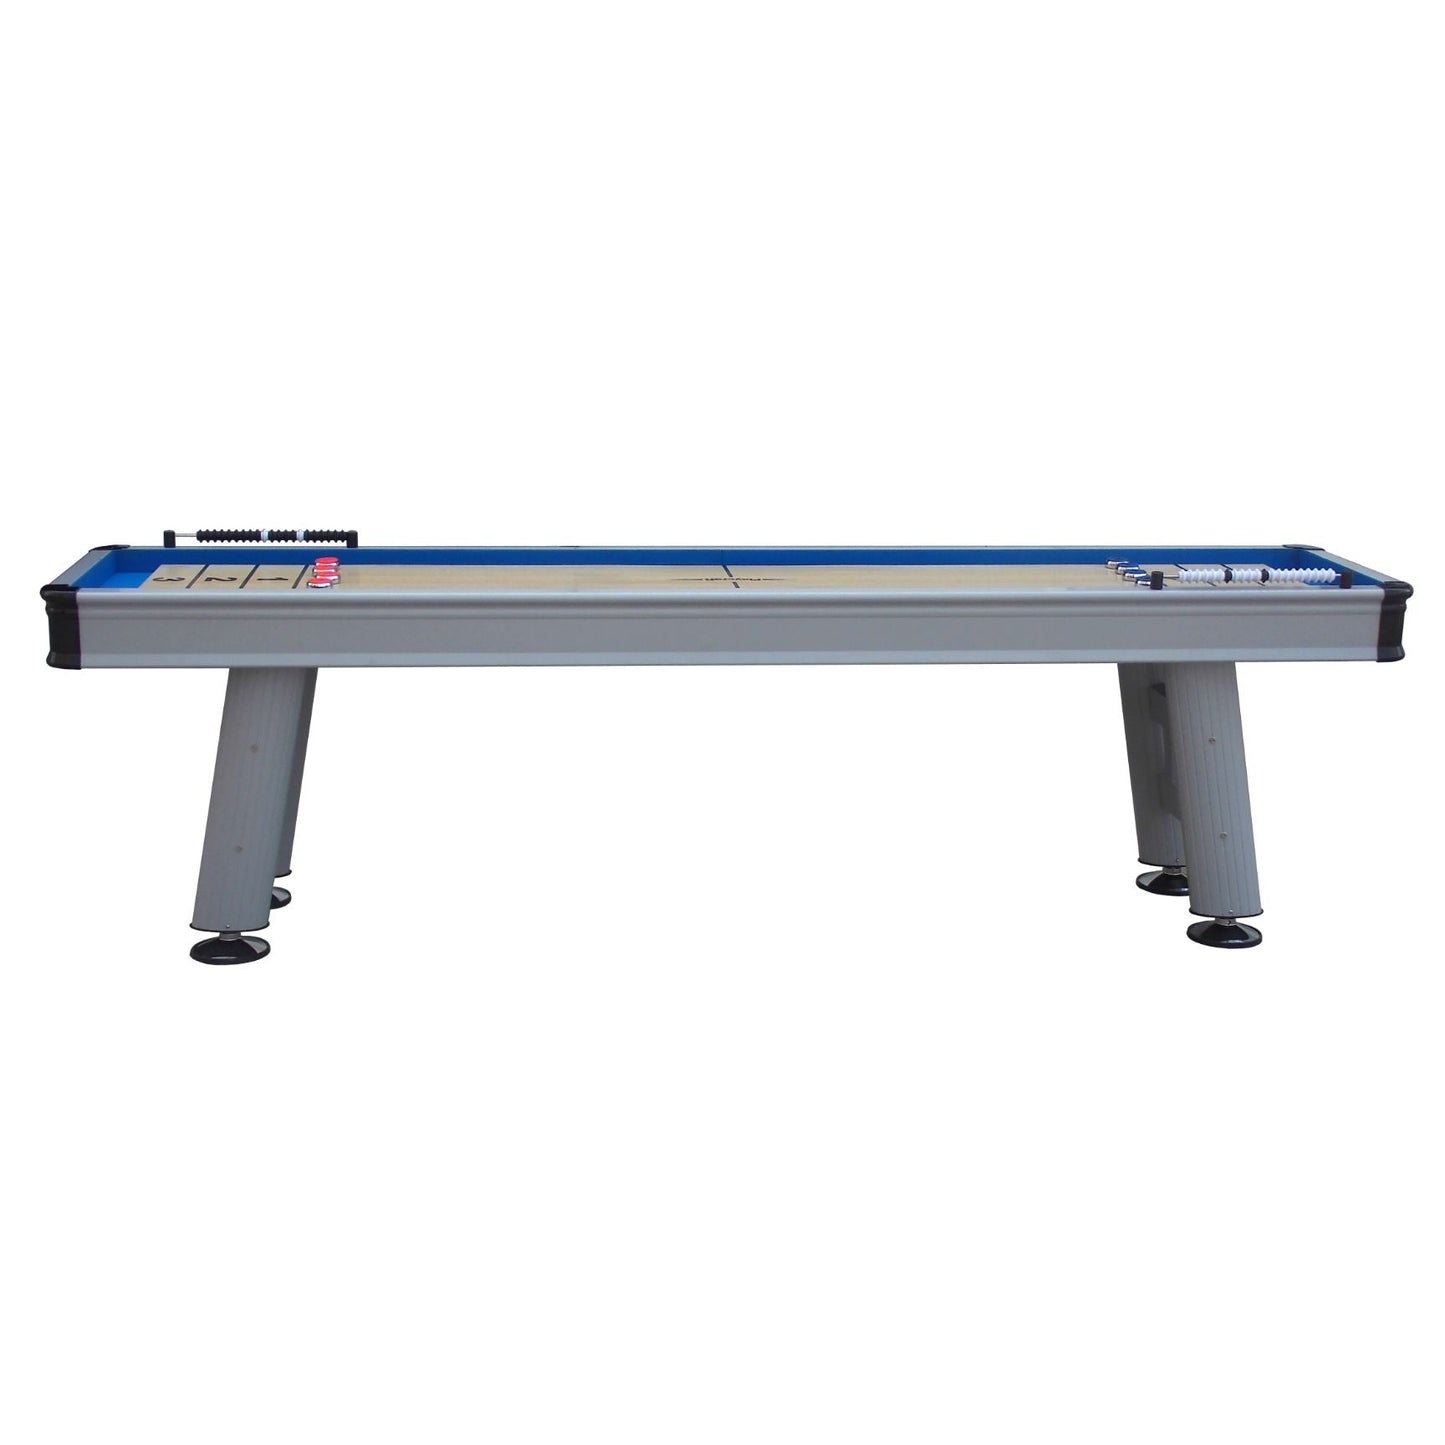 Playcraft Extera Outdoor Shuffleboard Table with Playing Accessories - Upper Livin